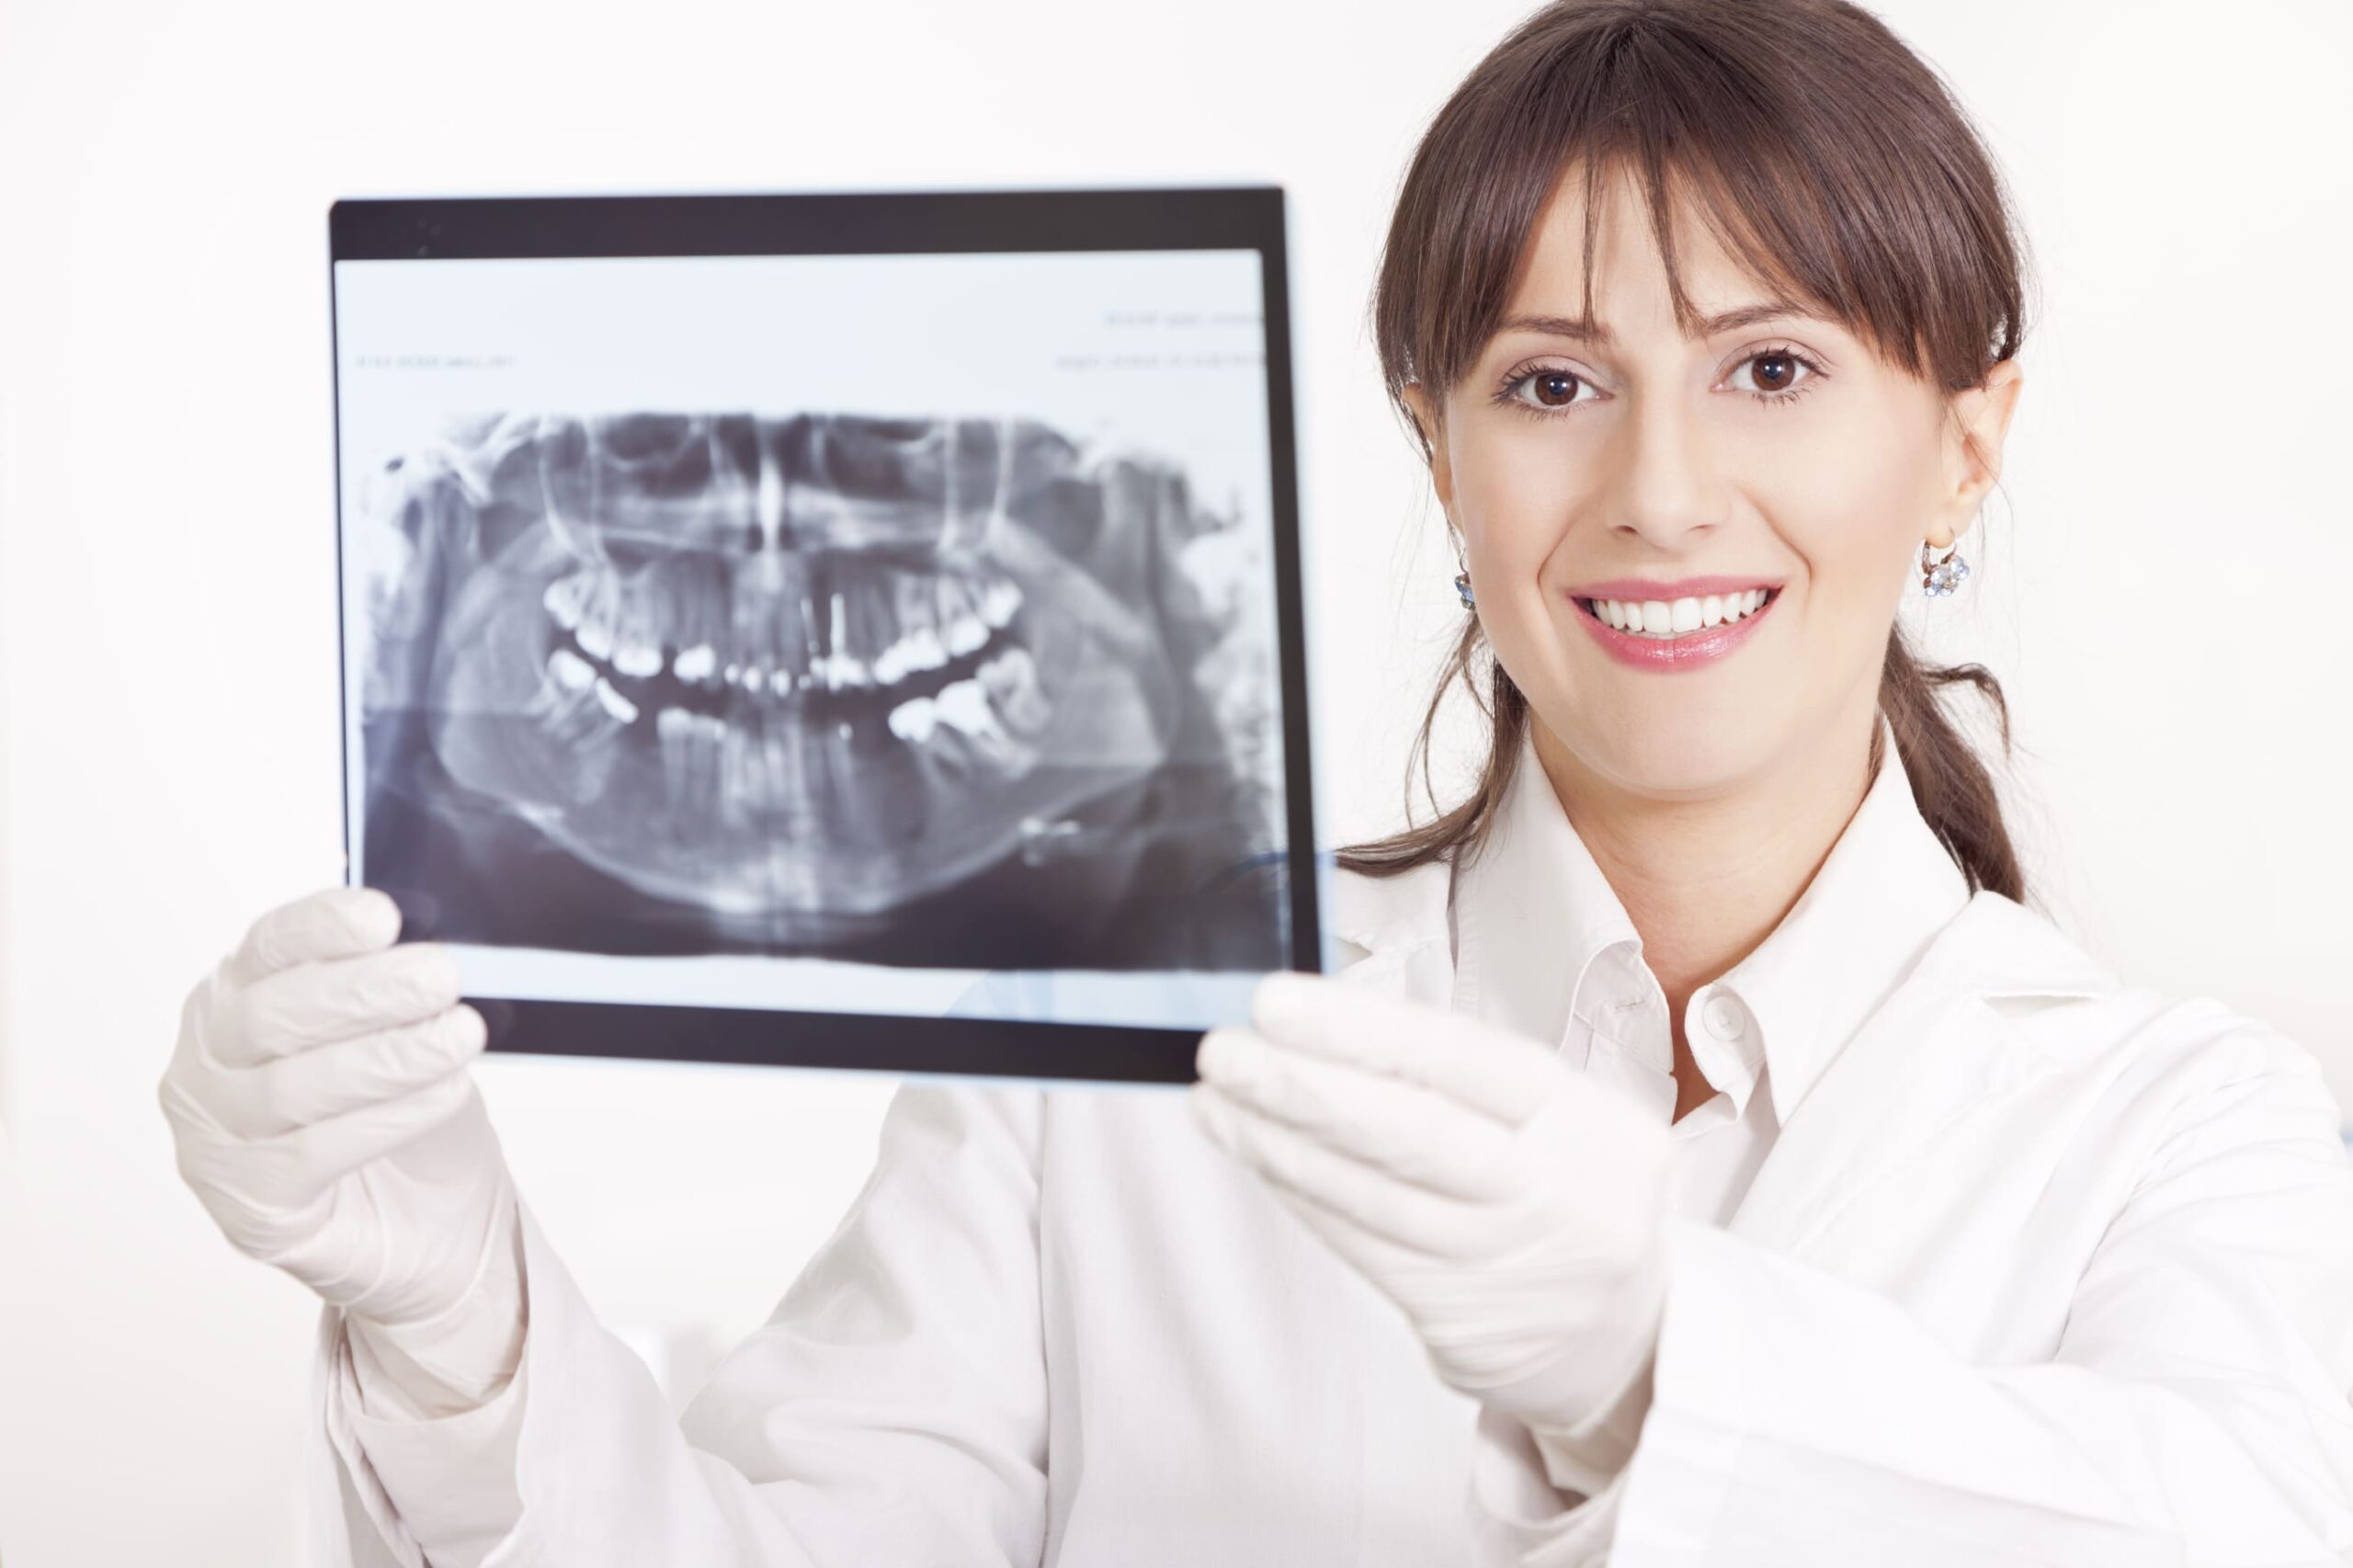 Why Would A Dentist Offer Free X-rays With In-office Treatments?